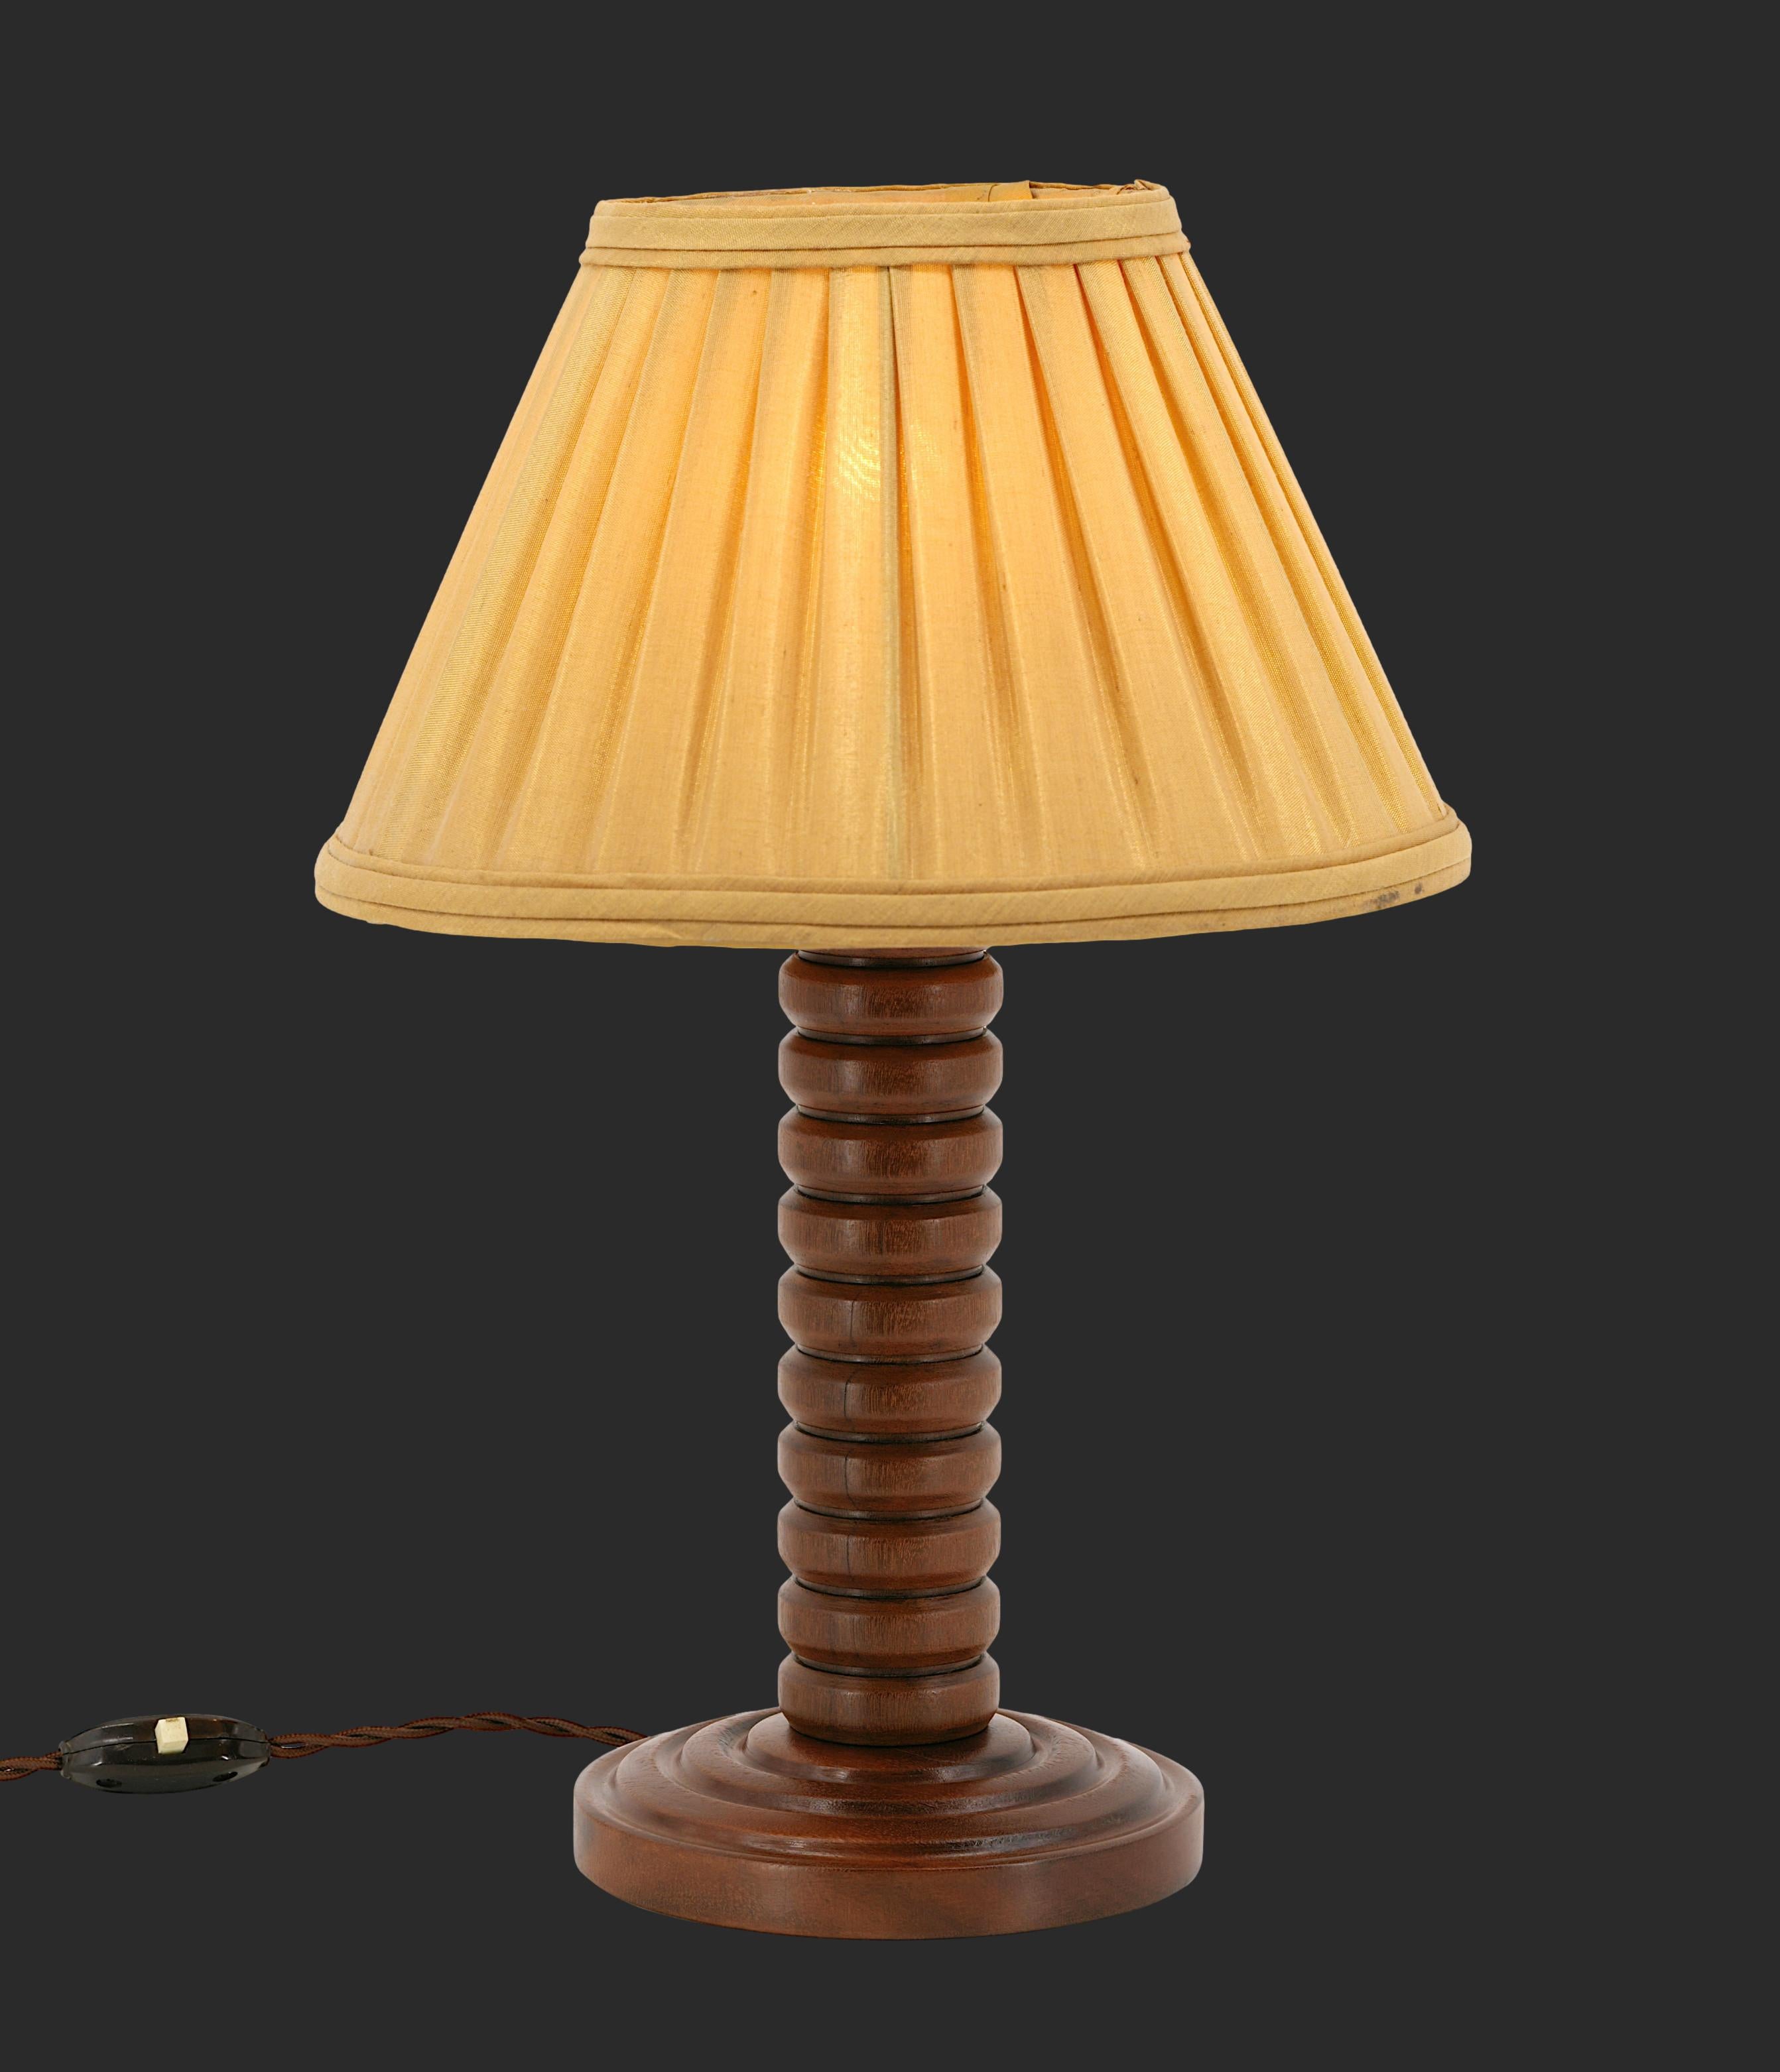 French Art Deco Wooden Table Lamp by Bouchard, 1930s In Good Condition For Sale In Saint-Amans-des-Cots, FR